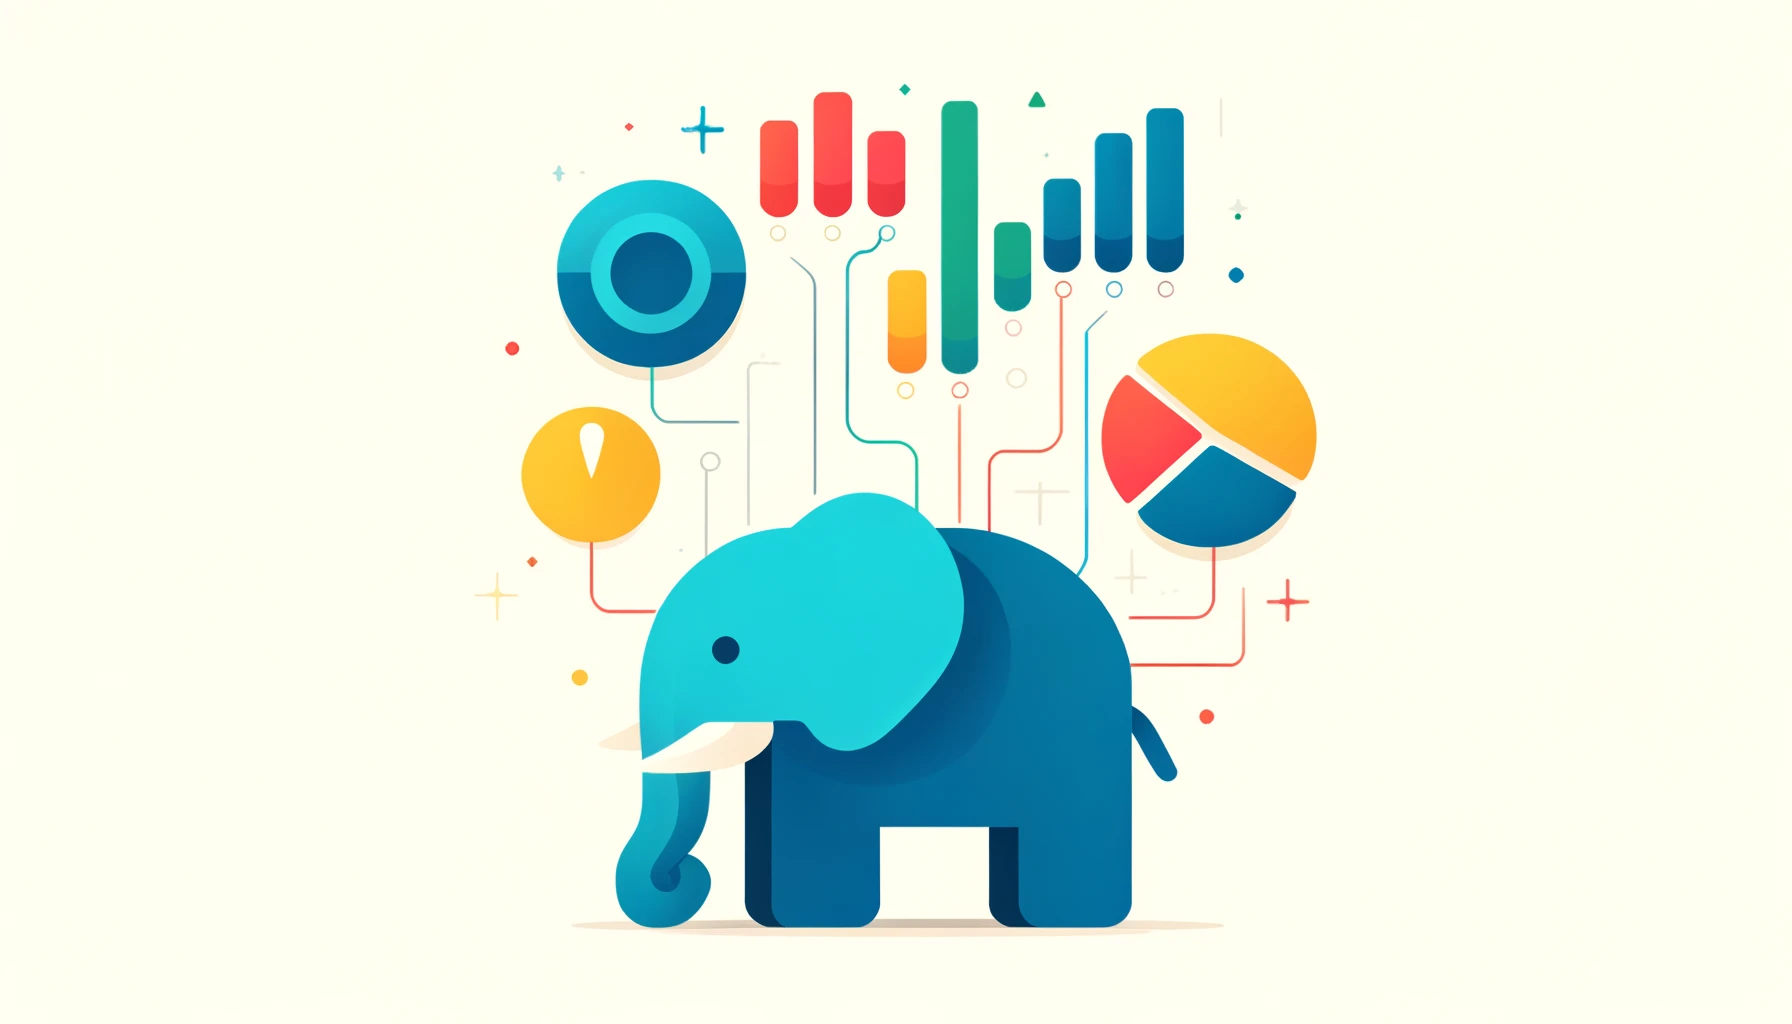 Minimalist flat design illustrating PHP and report generation. A stylized blue elephant, representing PHP, faces towards a series of colorful flat bar charts and pie charts, symbolizing the generation of reports. Thin, flowing lines connect PHP to the charts, indicating data processing and report creation.